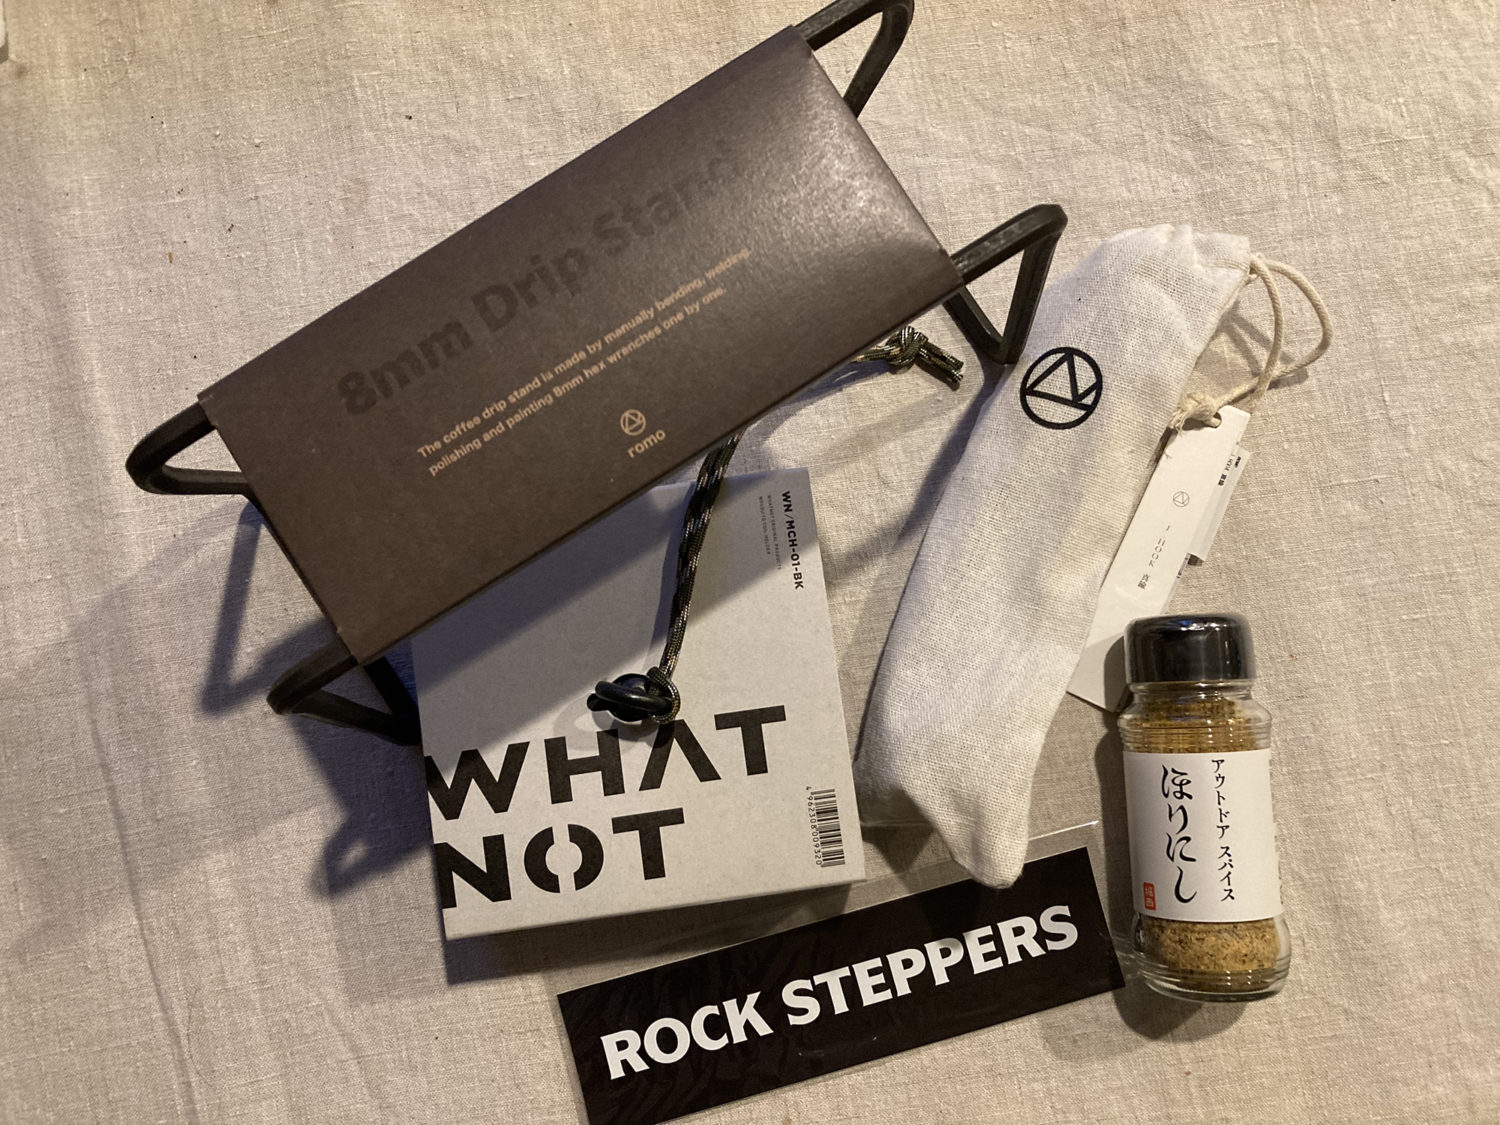 ROCK STEPPERS　購入品